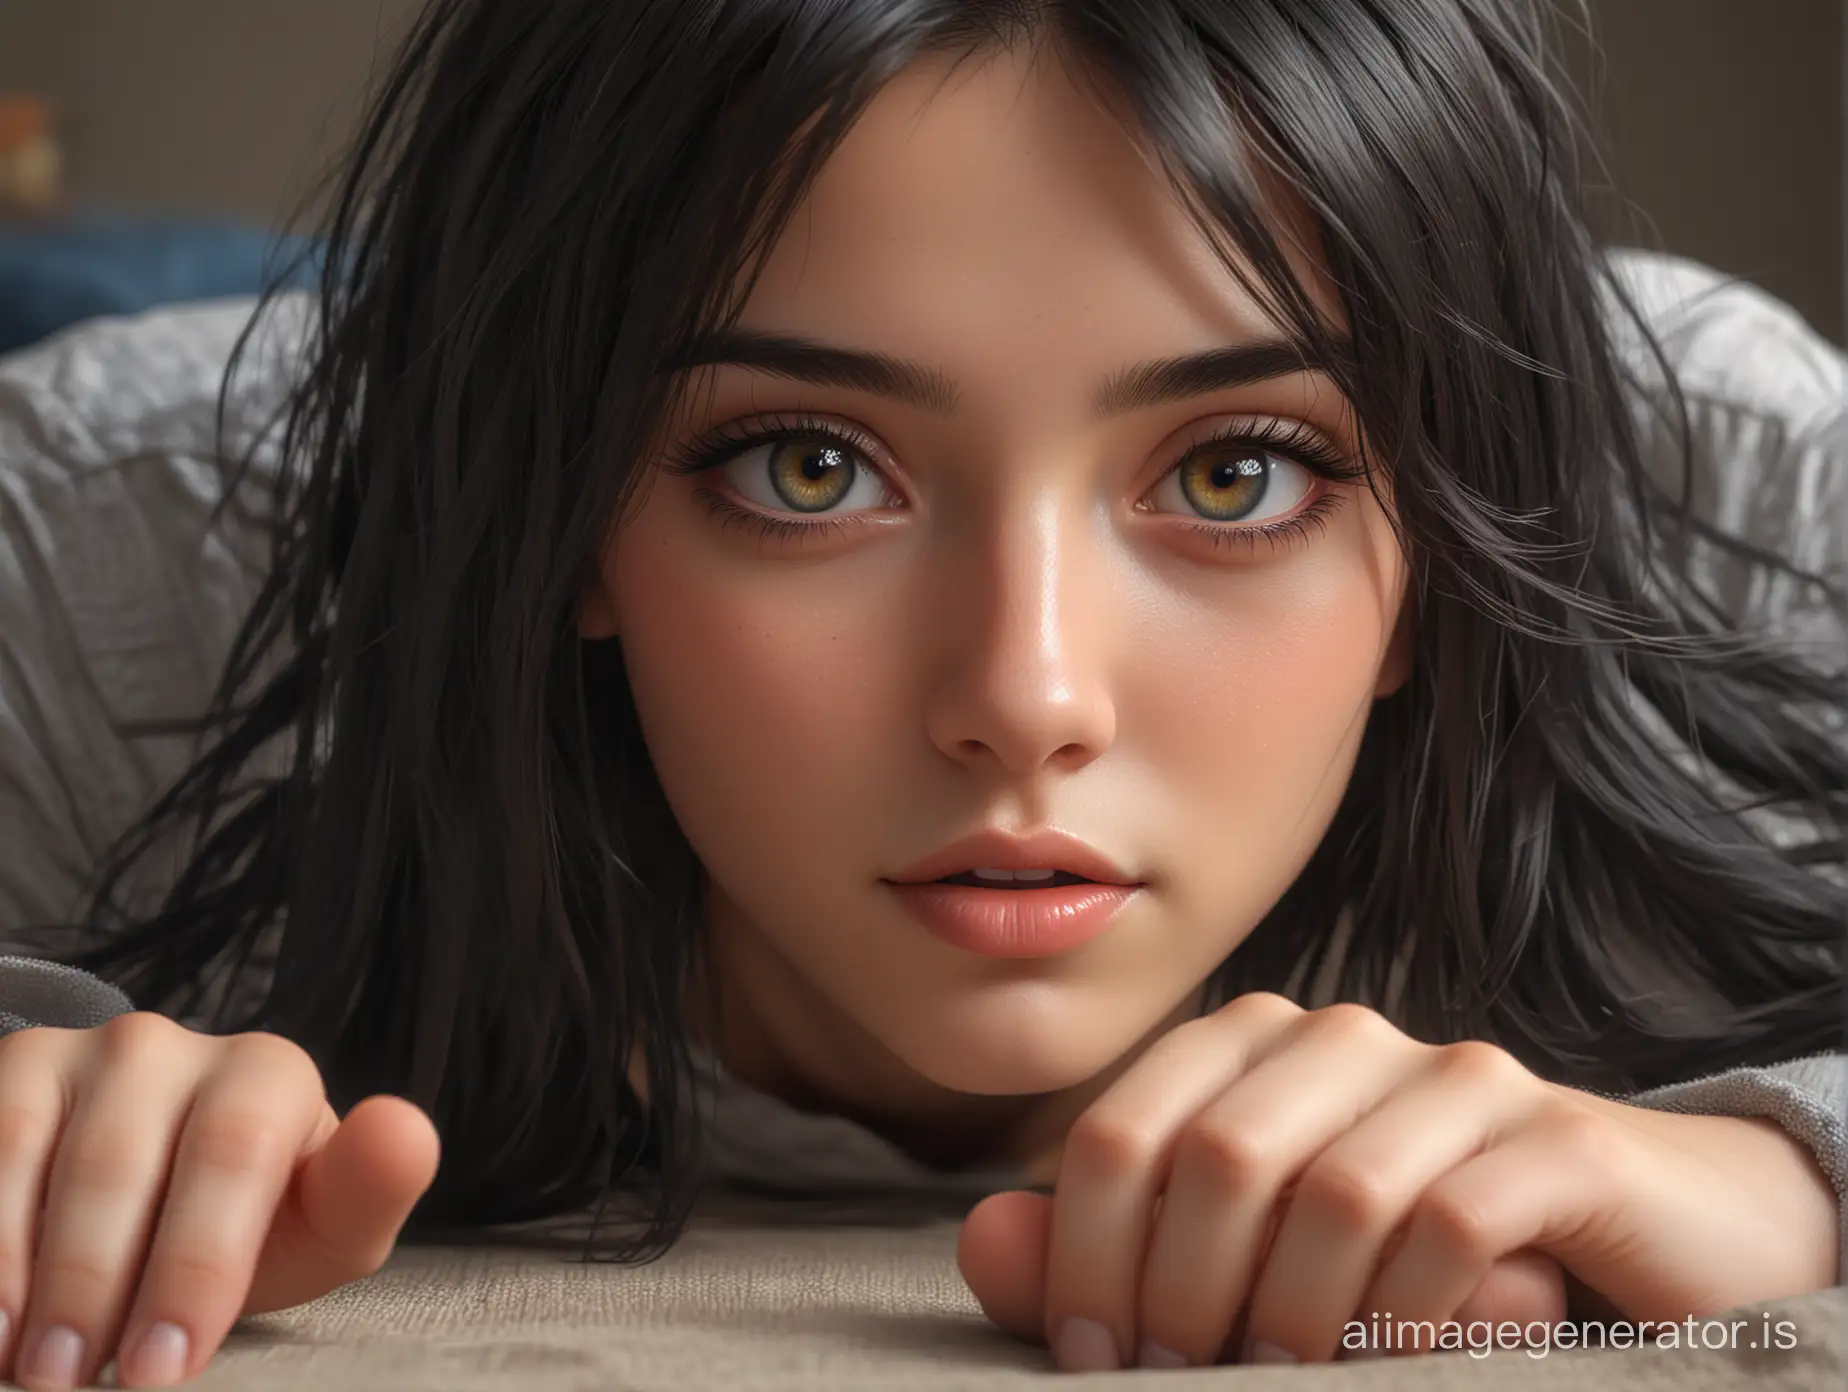 Hyperrealistic-Portrait-with-Dreamy-Eyes-and-Soft-Lighting